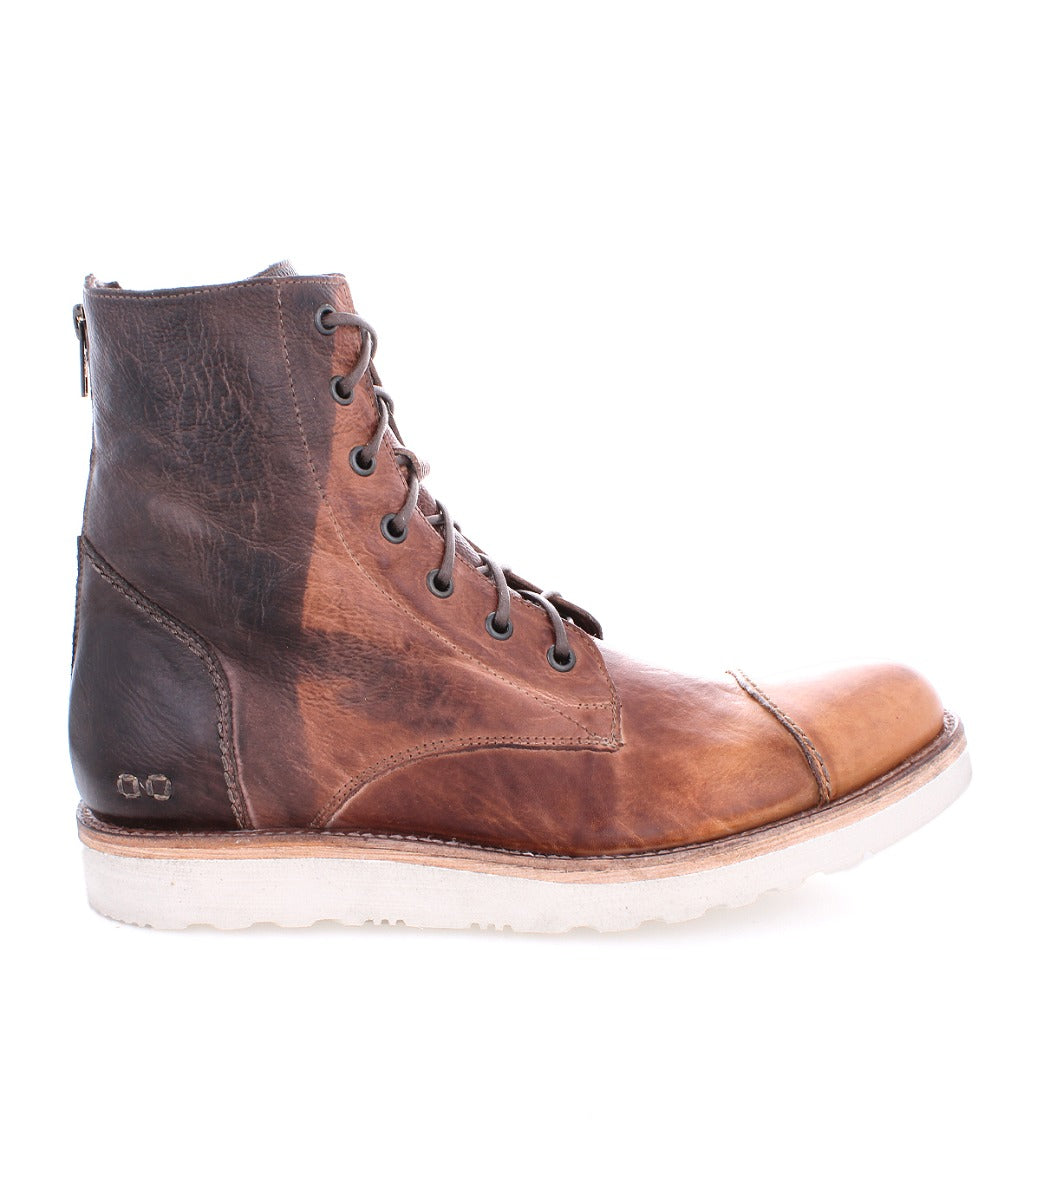 A men's brown Protege Light boot with laces and a white sole, made by Bed Stu.